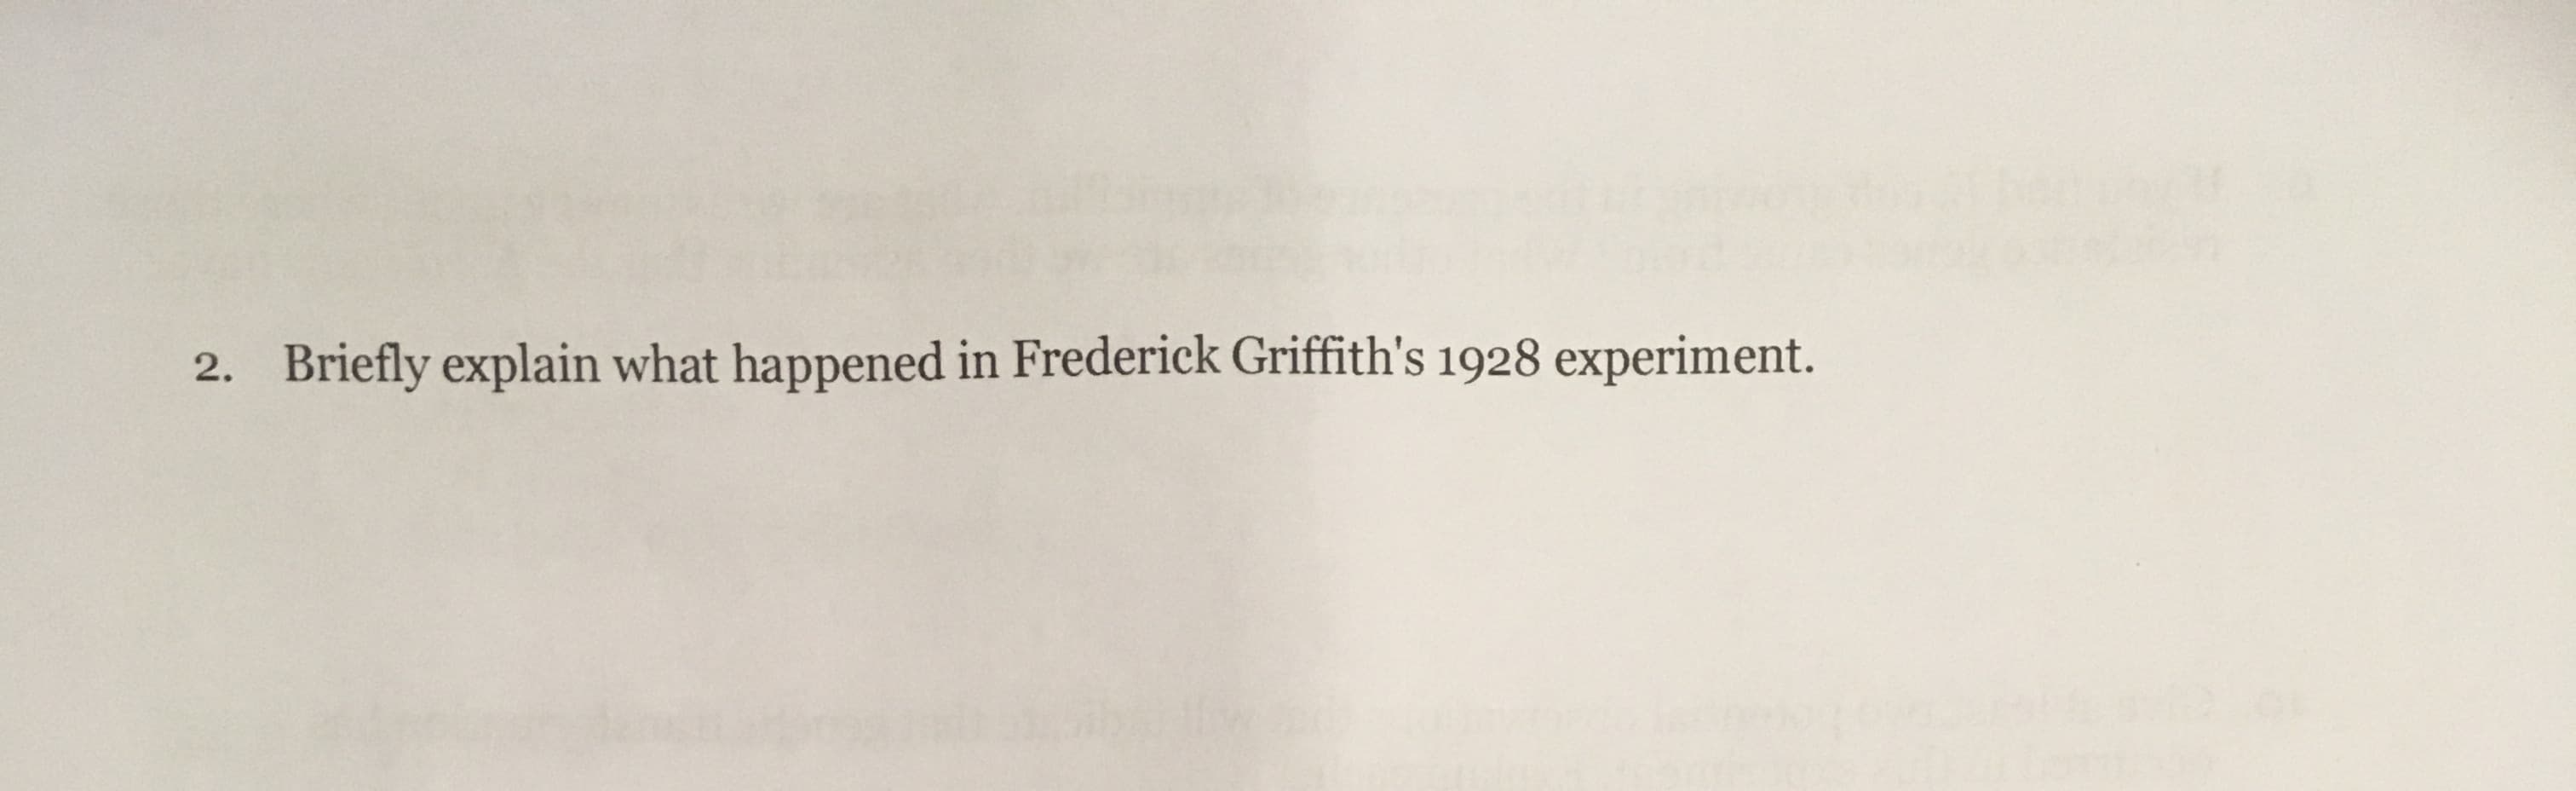 Briefly explain what happened in Frederick Griffith's 1928 experiment.
2.
